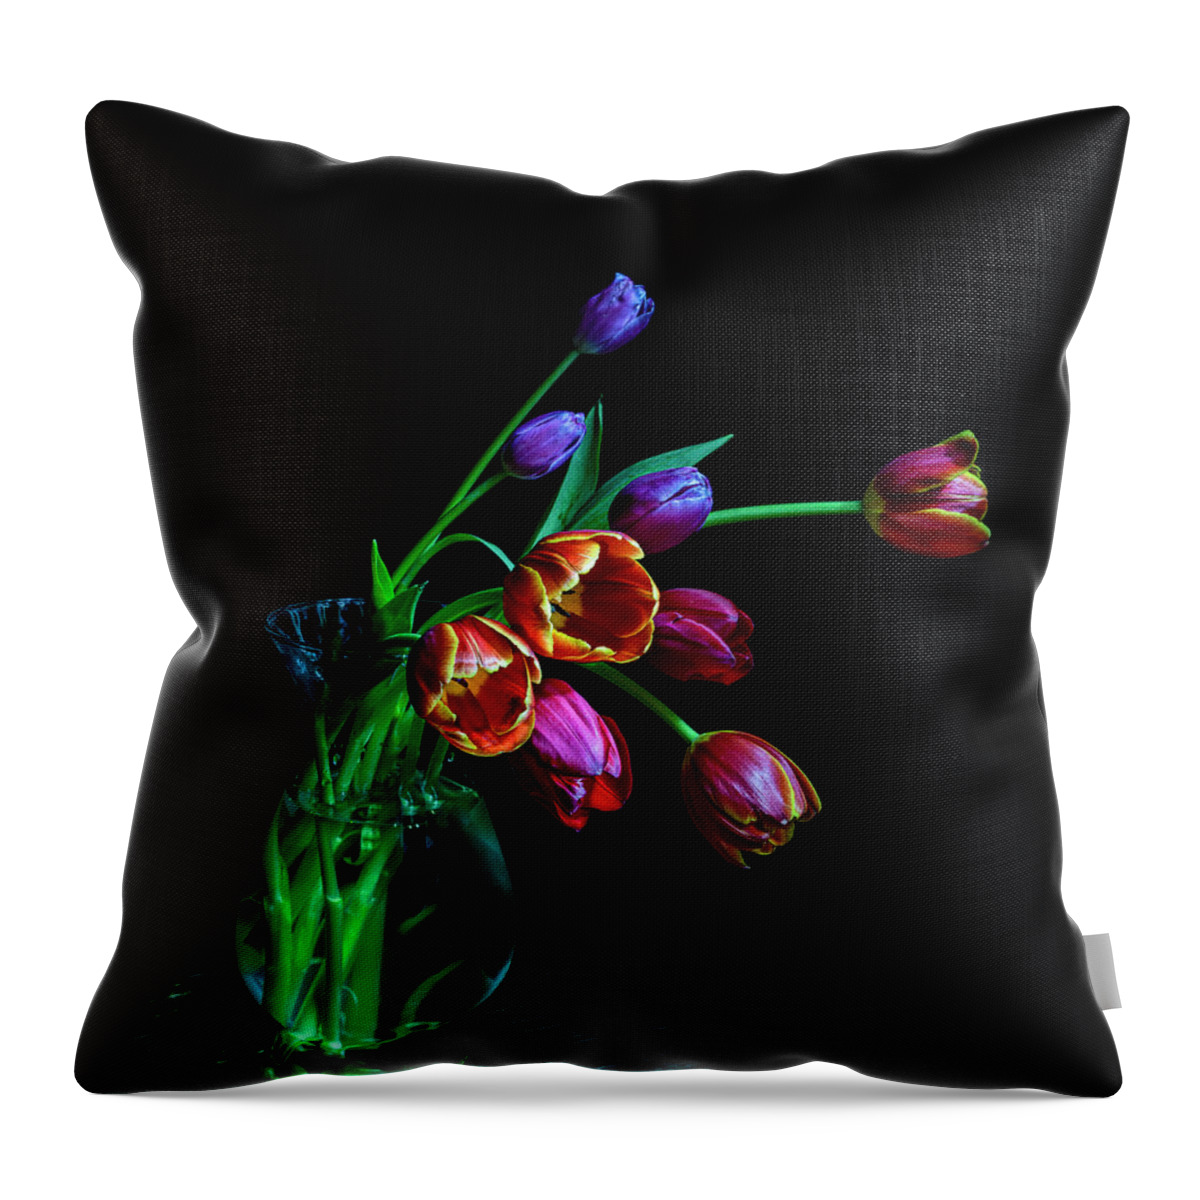 Tulips Throw Pillow featuring the photograph Off Balance by Judi Kubes